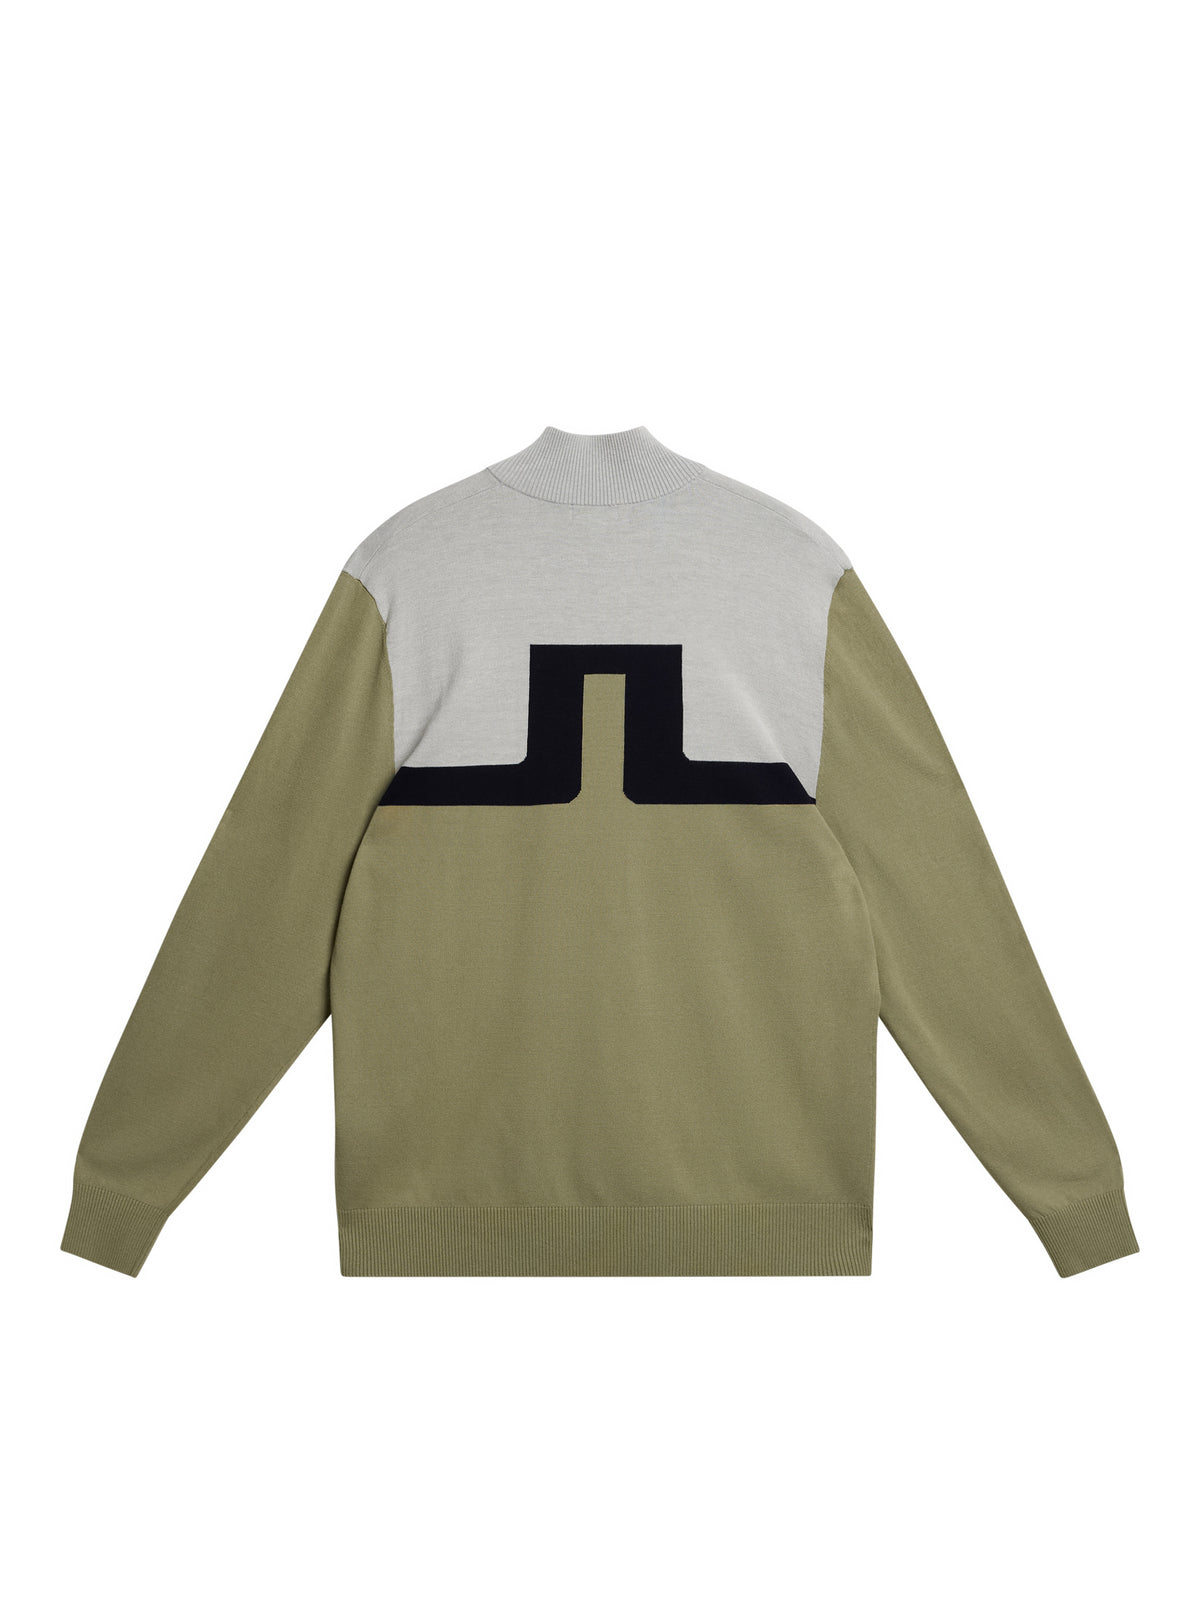 Jeff Knitted Sweater / Oil Green